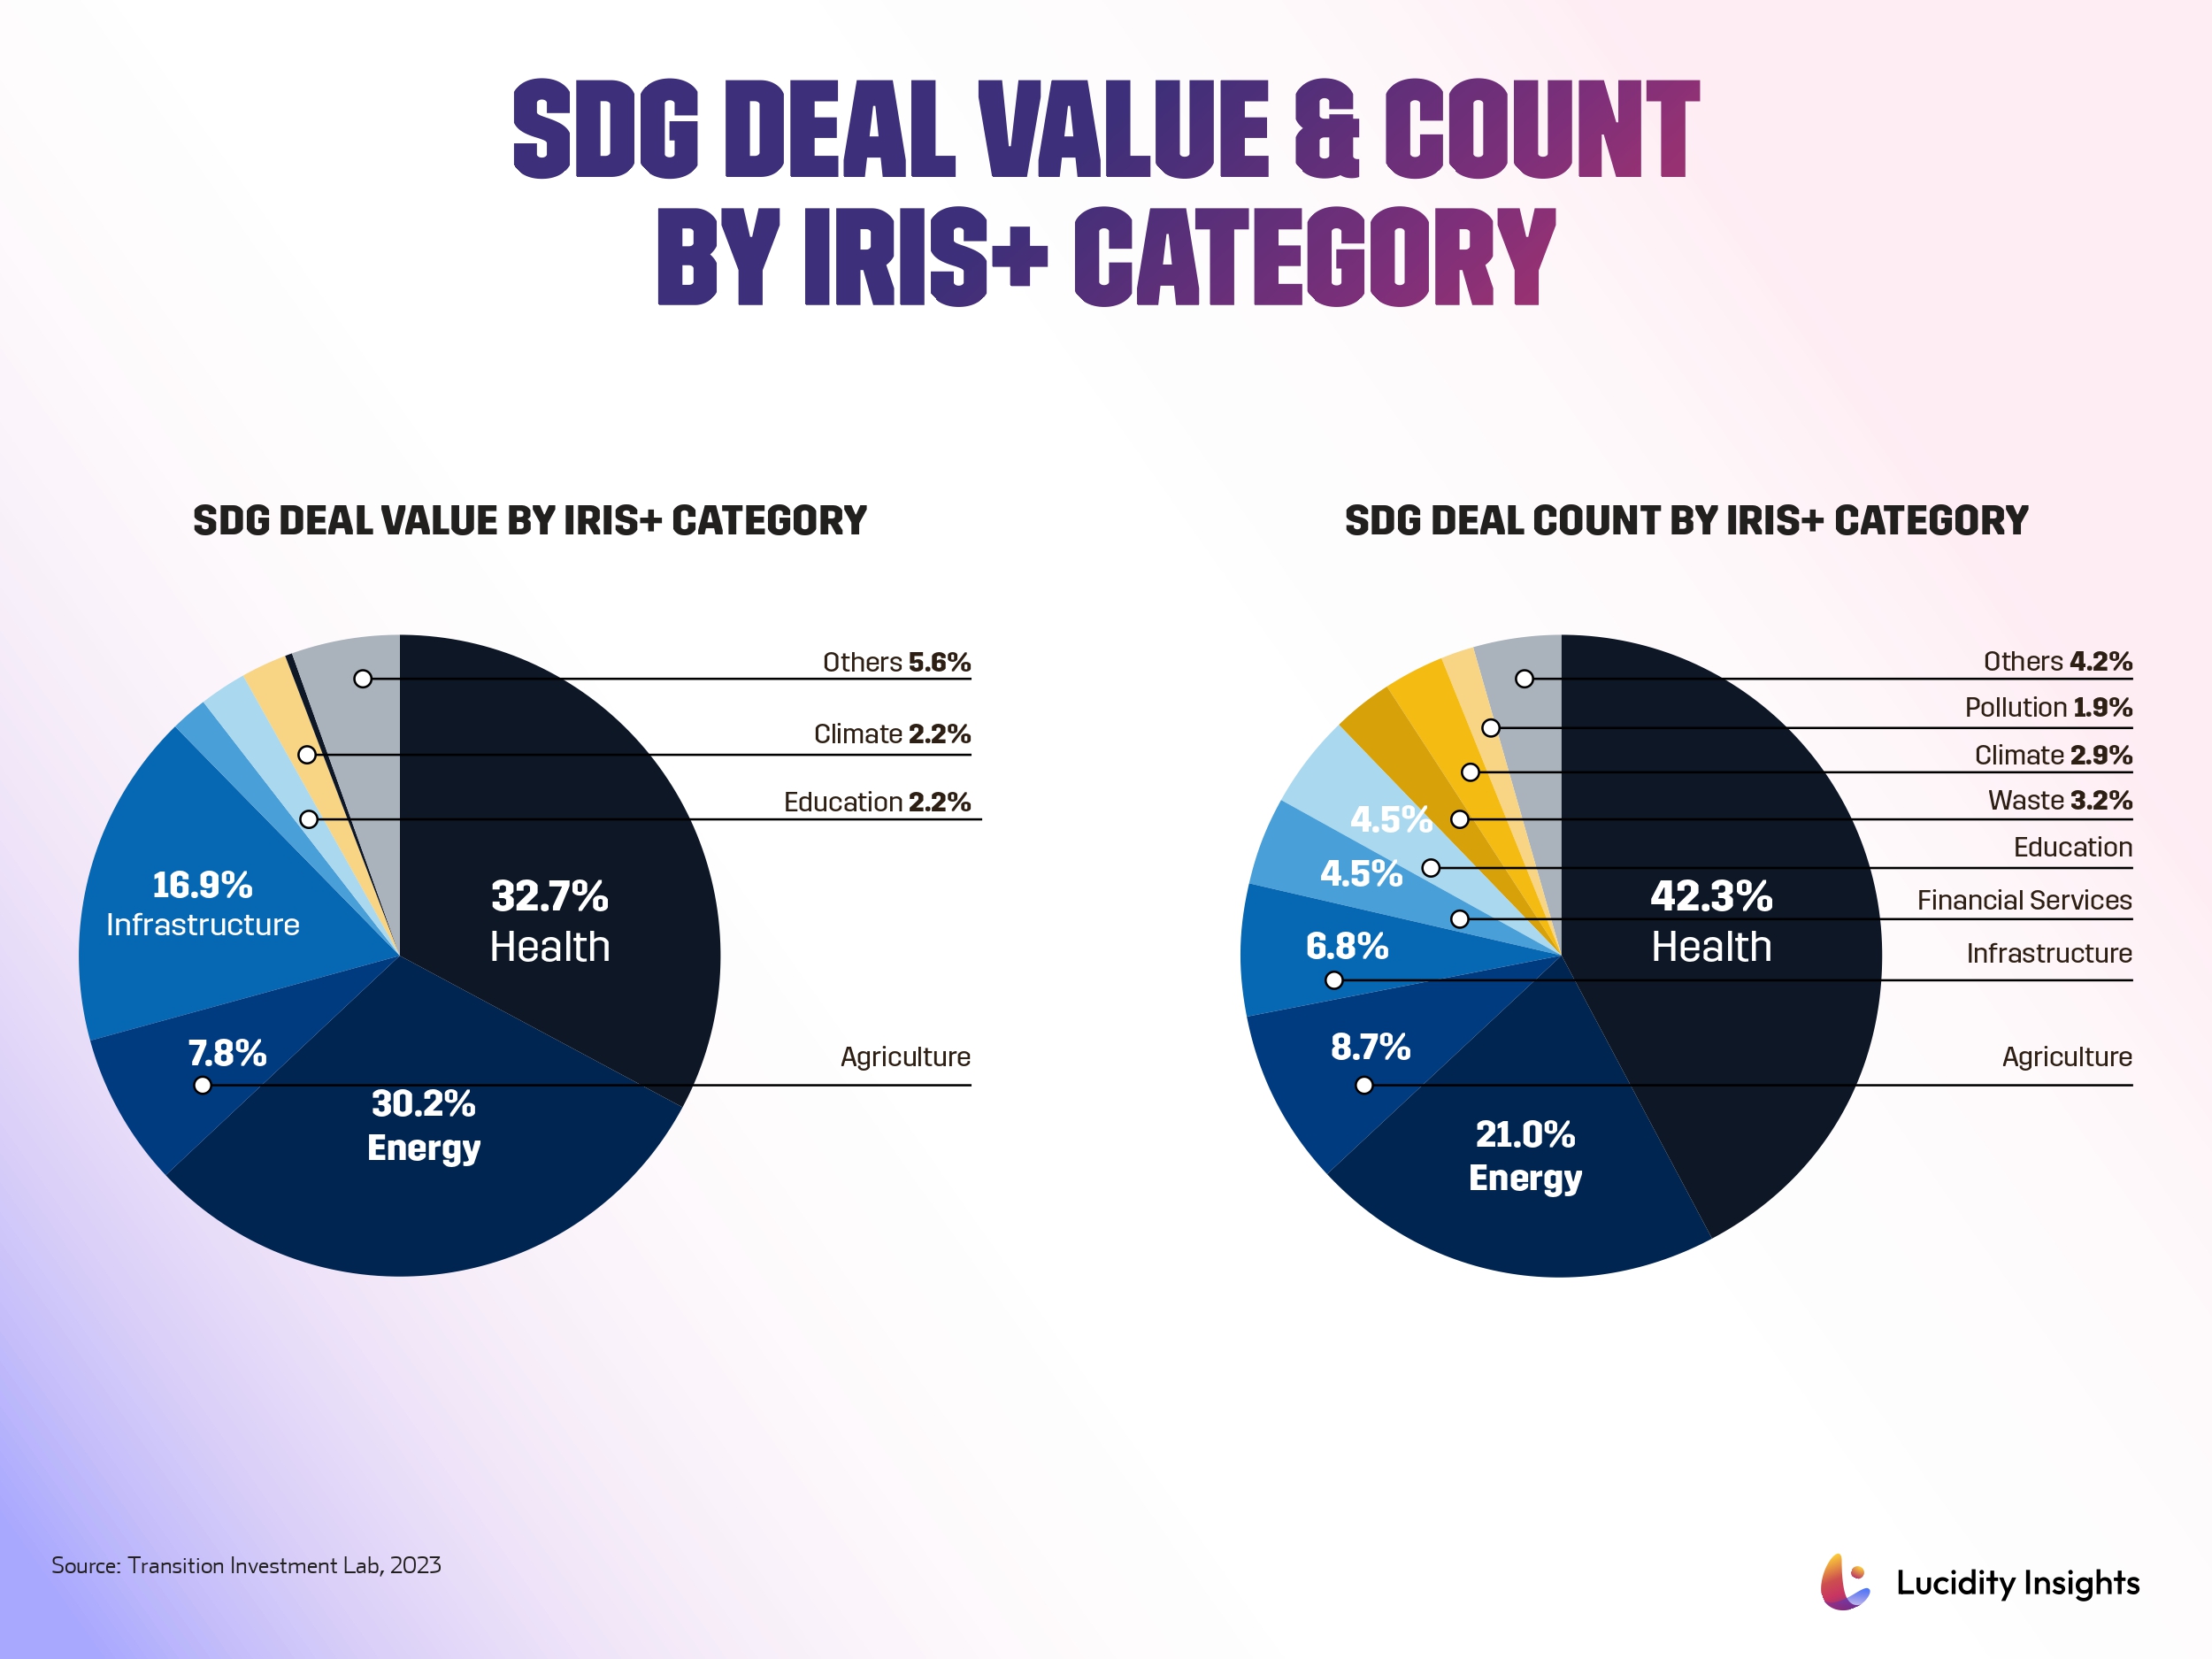 SDG Deal Value & Count by Iris+ Category